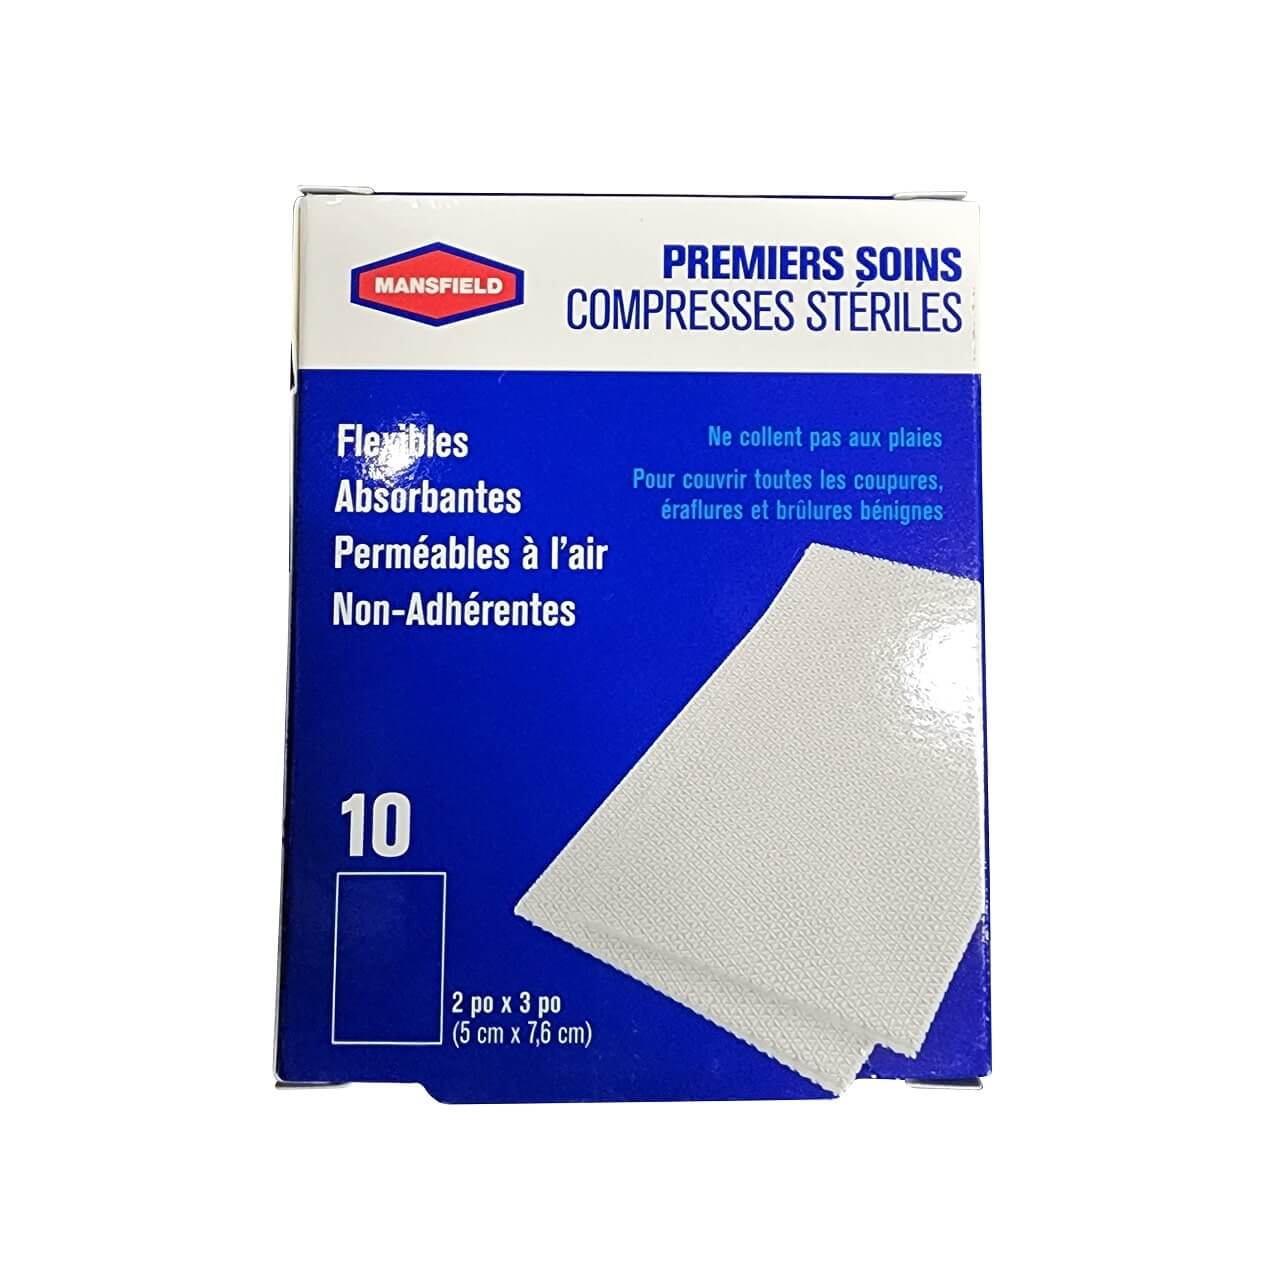 Product label for Mansfield First Aid Sterile Pads (5 cm x 7.6 cm) (10 pads) in French